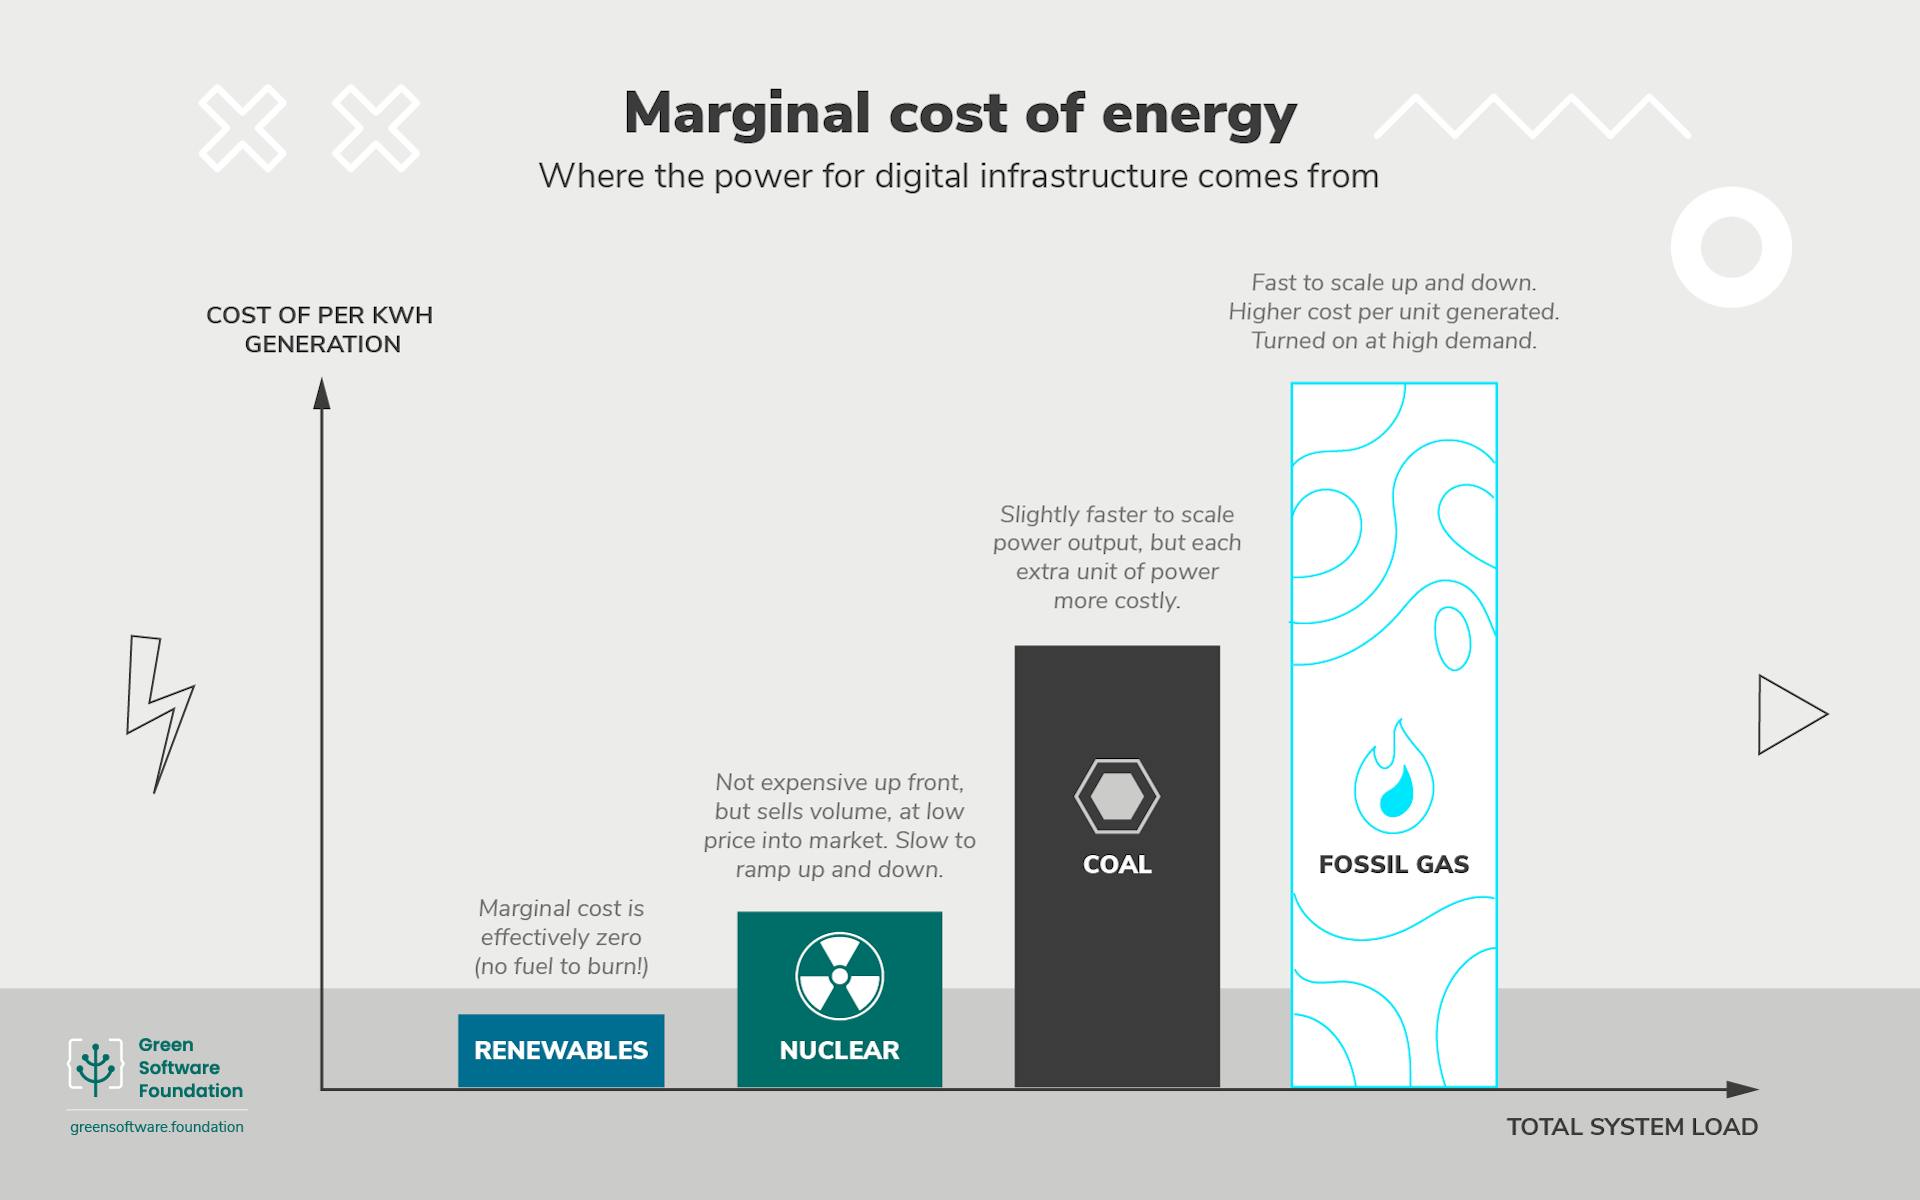 Comparing-marginal-costs-of-nuclear-and-fossil-fuels-with renewable-sources-in-the-mix